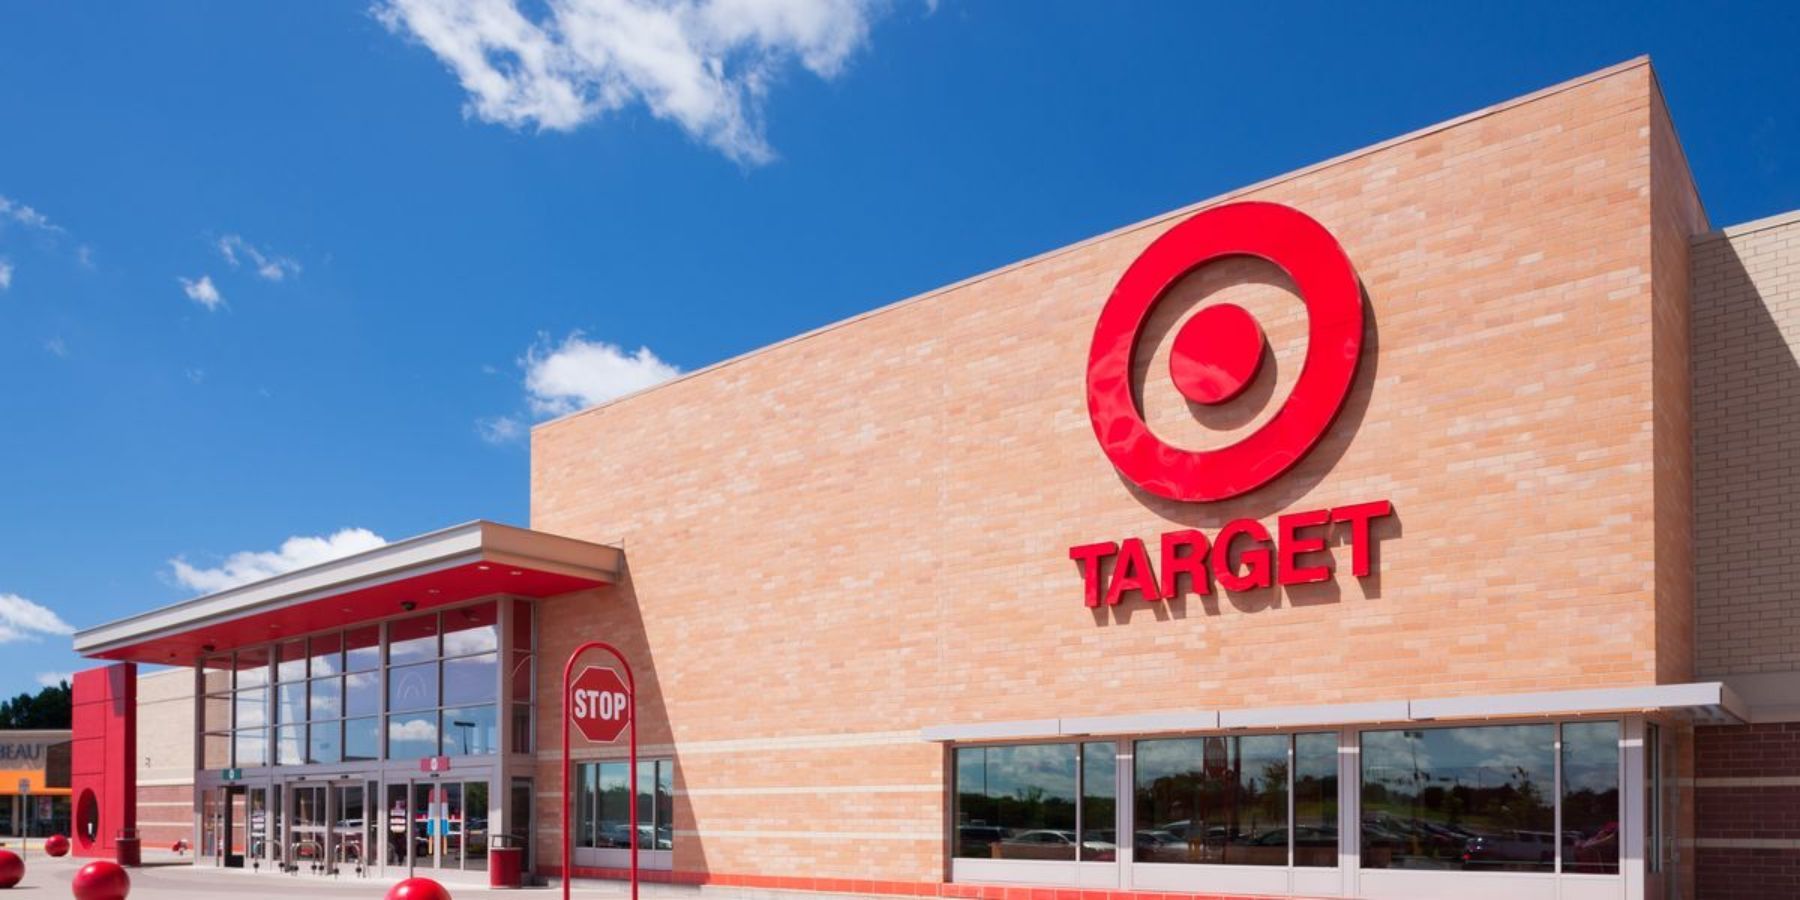 The Best Black Friday Gaming and Tech Deals at Target